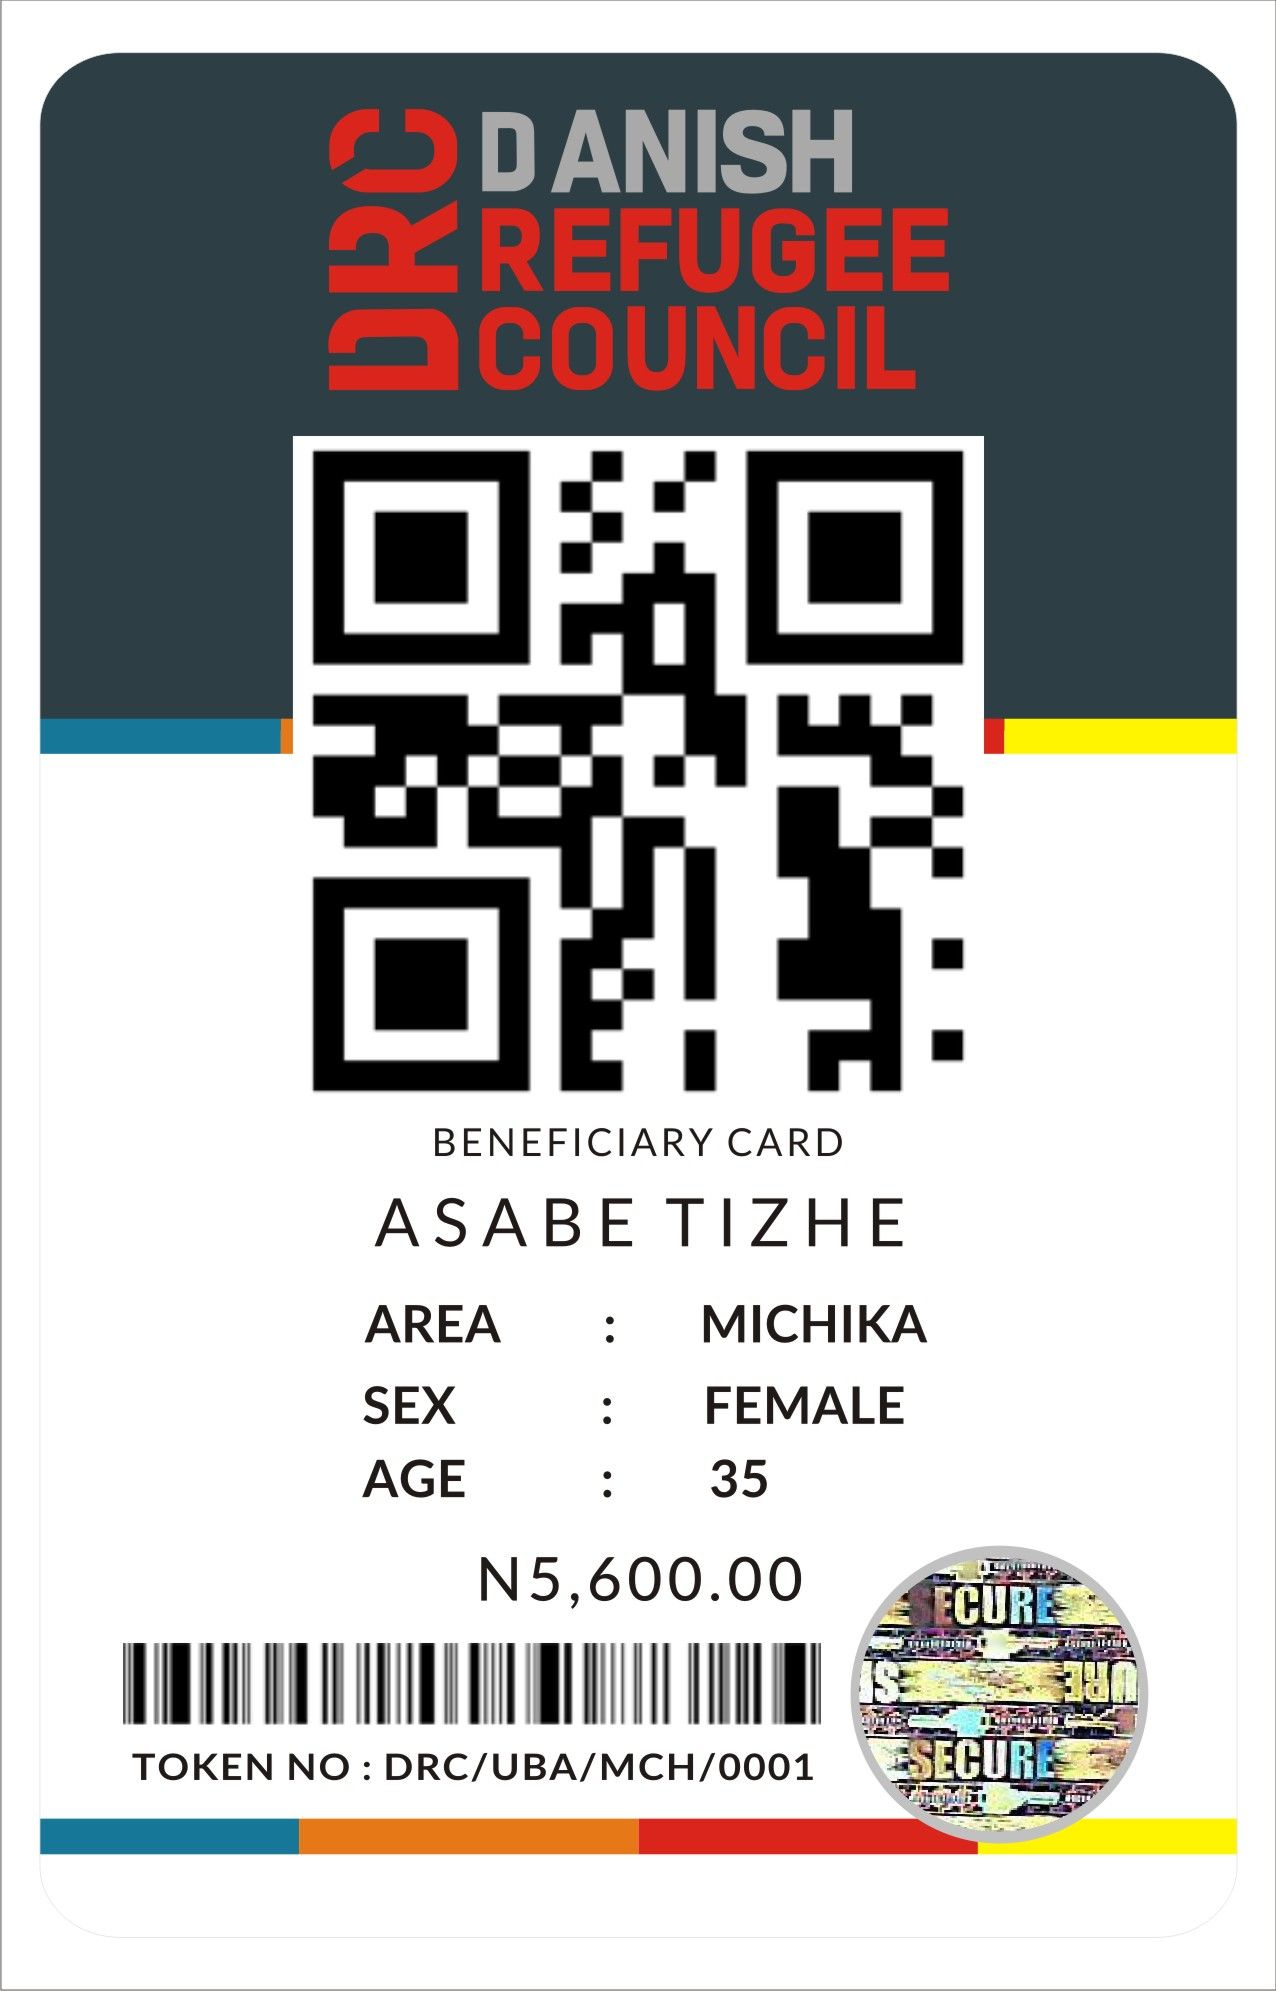 PRINT QR CODE, BAR CODE AND AUTHENTICATION LABELS CALL EMMANUEL ON 08176499649